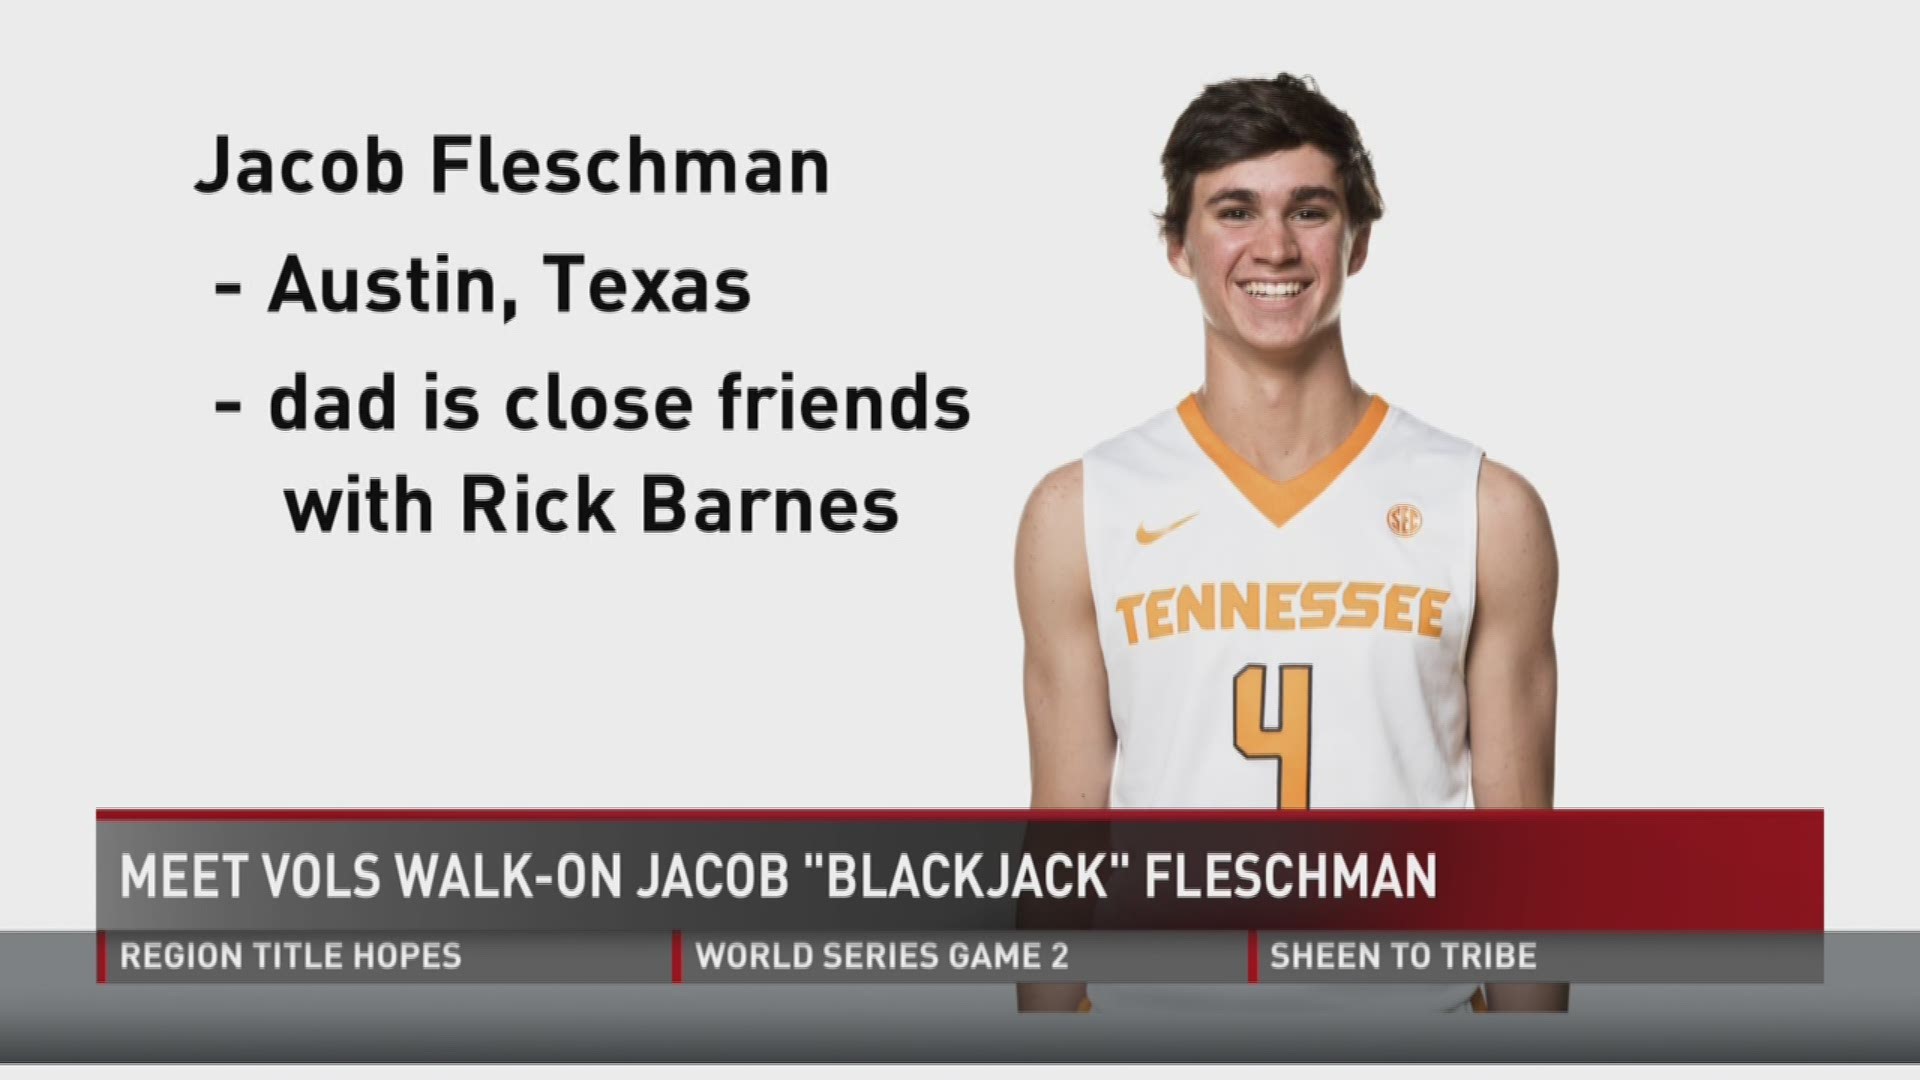 Tennessee freshman walk-on Jacob Fleschman has the coolest nickname on the team and it was given to him by an NBA superstar.